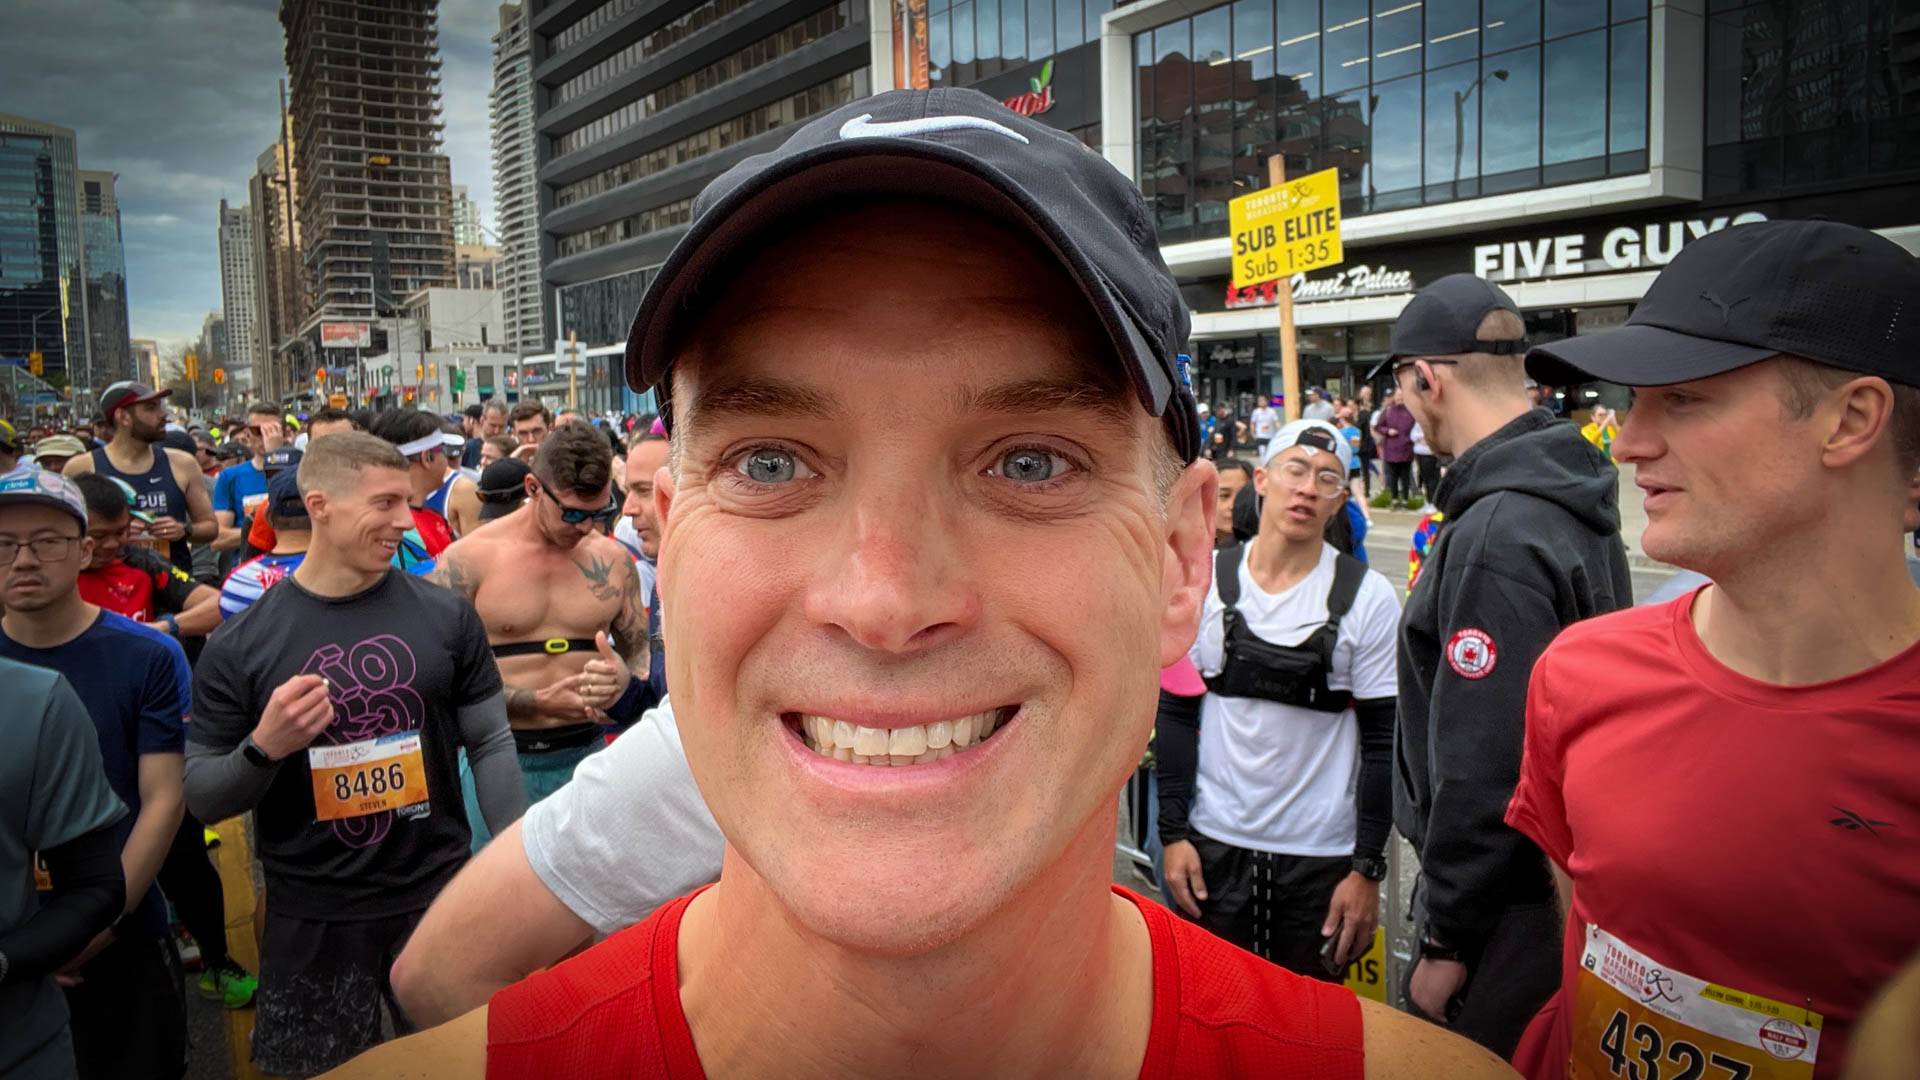 Selfie of me at the start line with the sub-elite sign in the background